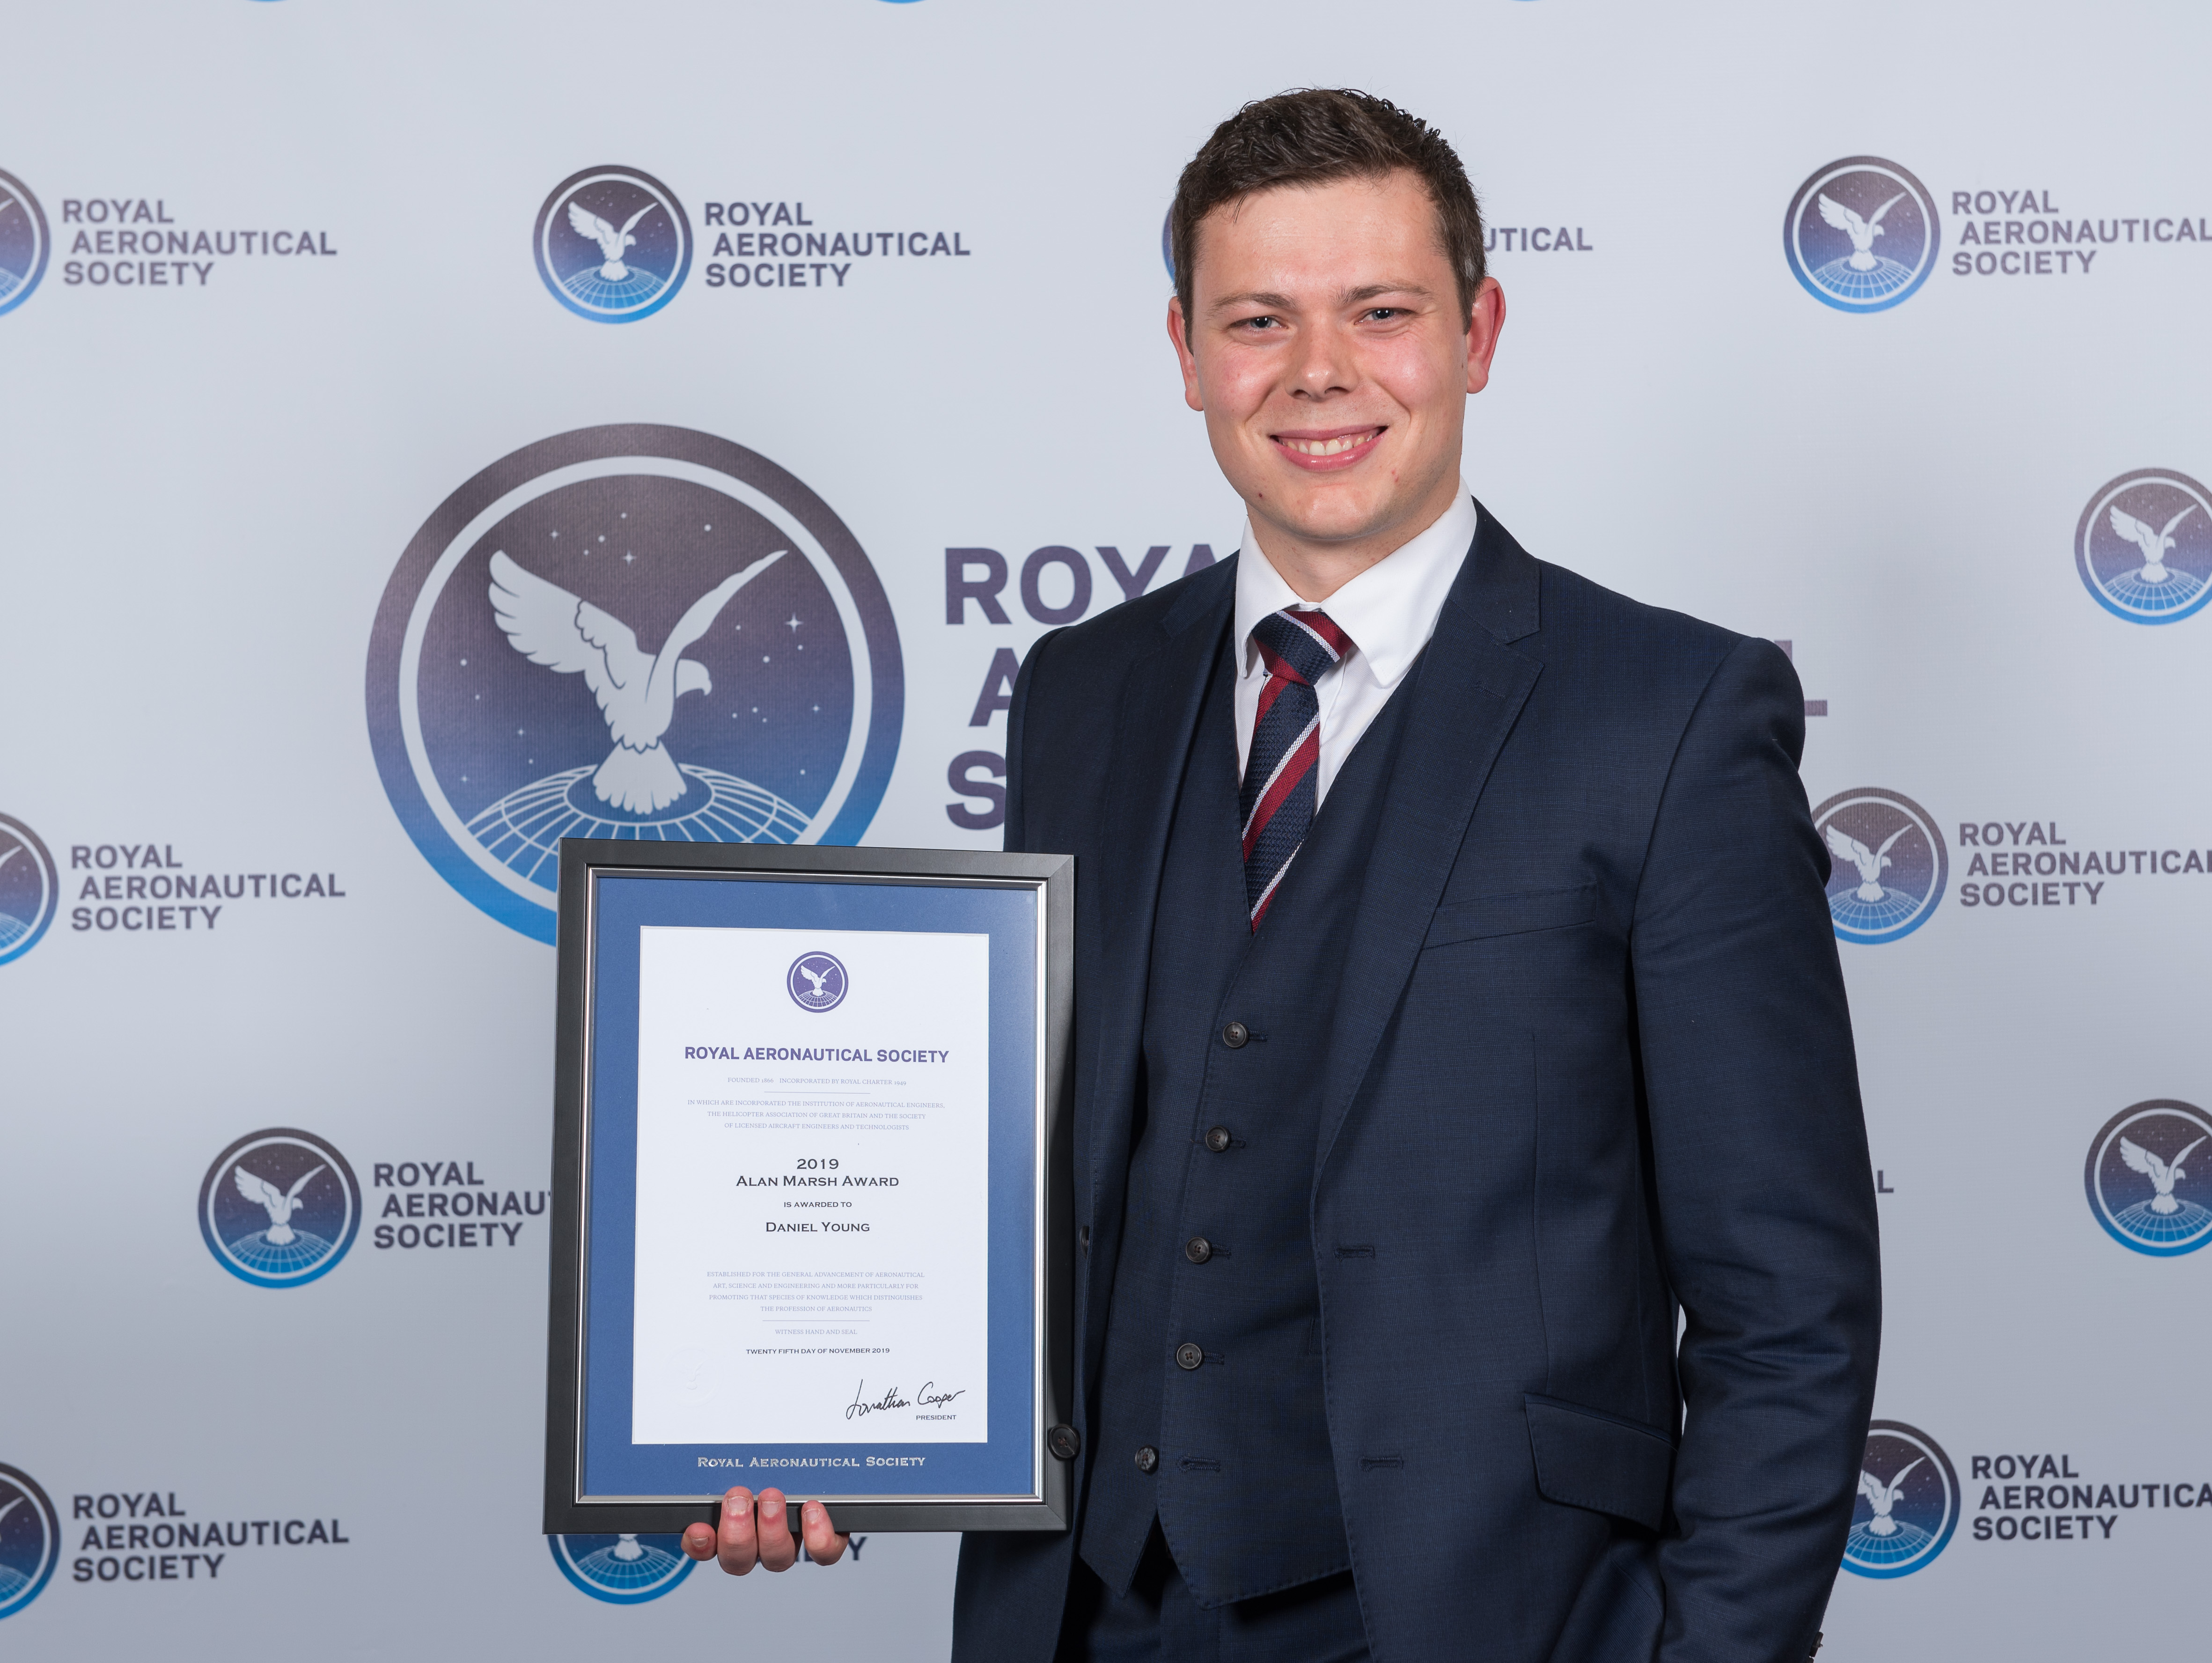 Daniel Young receives the Royal Aeronautical Society's Alan Marsh Award in 2019 for exceptional technical and leadership promise